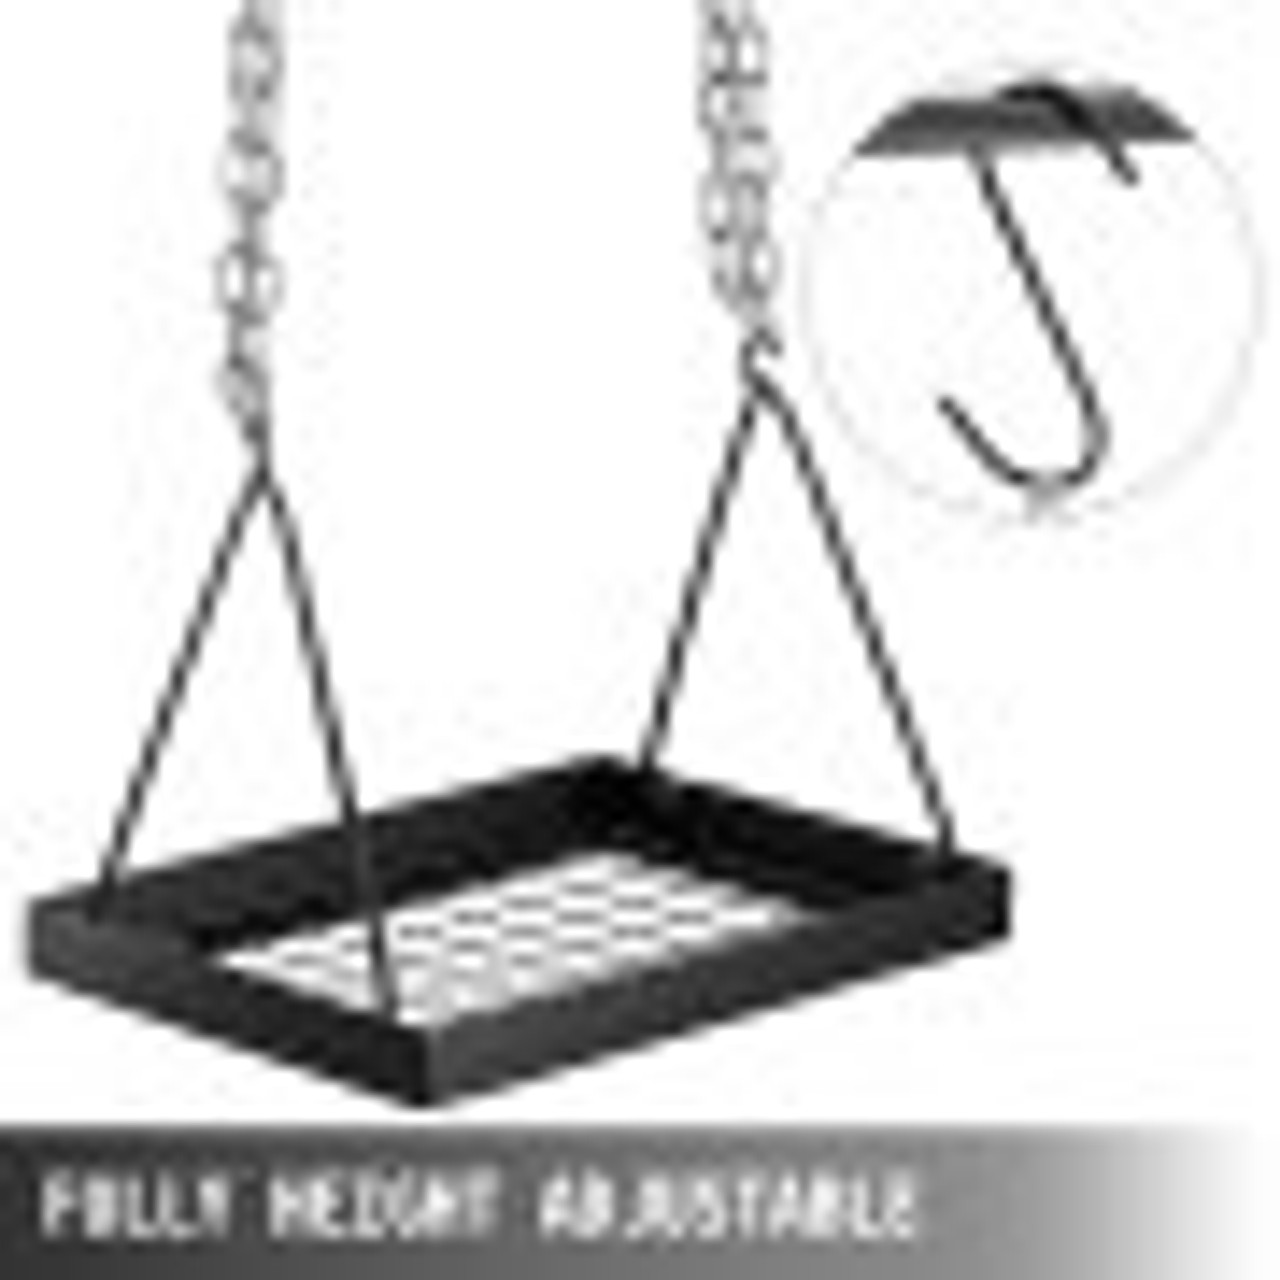 Swing Grill Campfire Cooking Stand, Outdoor Picnic Cookware, Bonfire Party Equipment,Adjustable Heightwith Hooks,Black